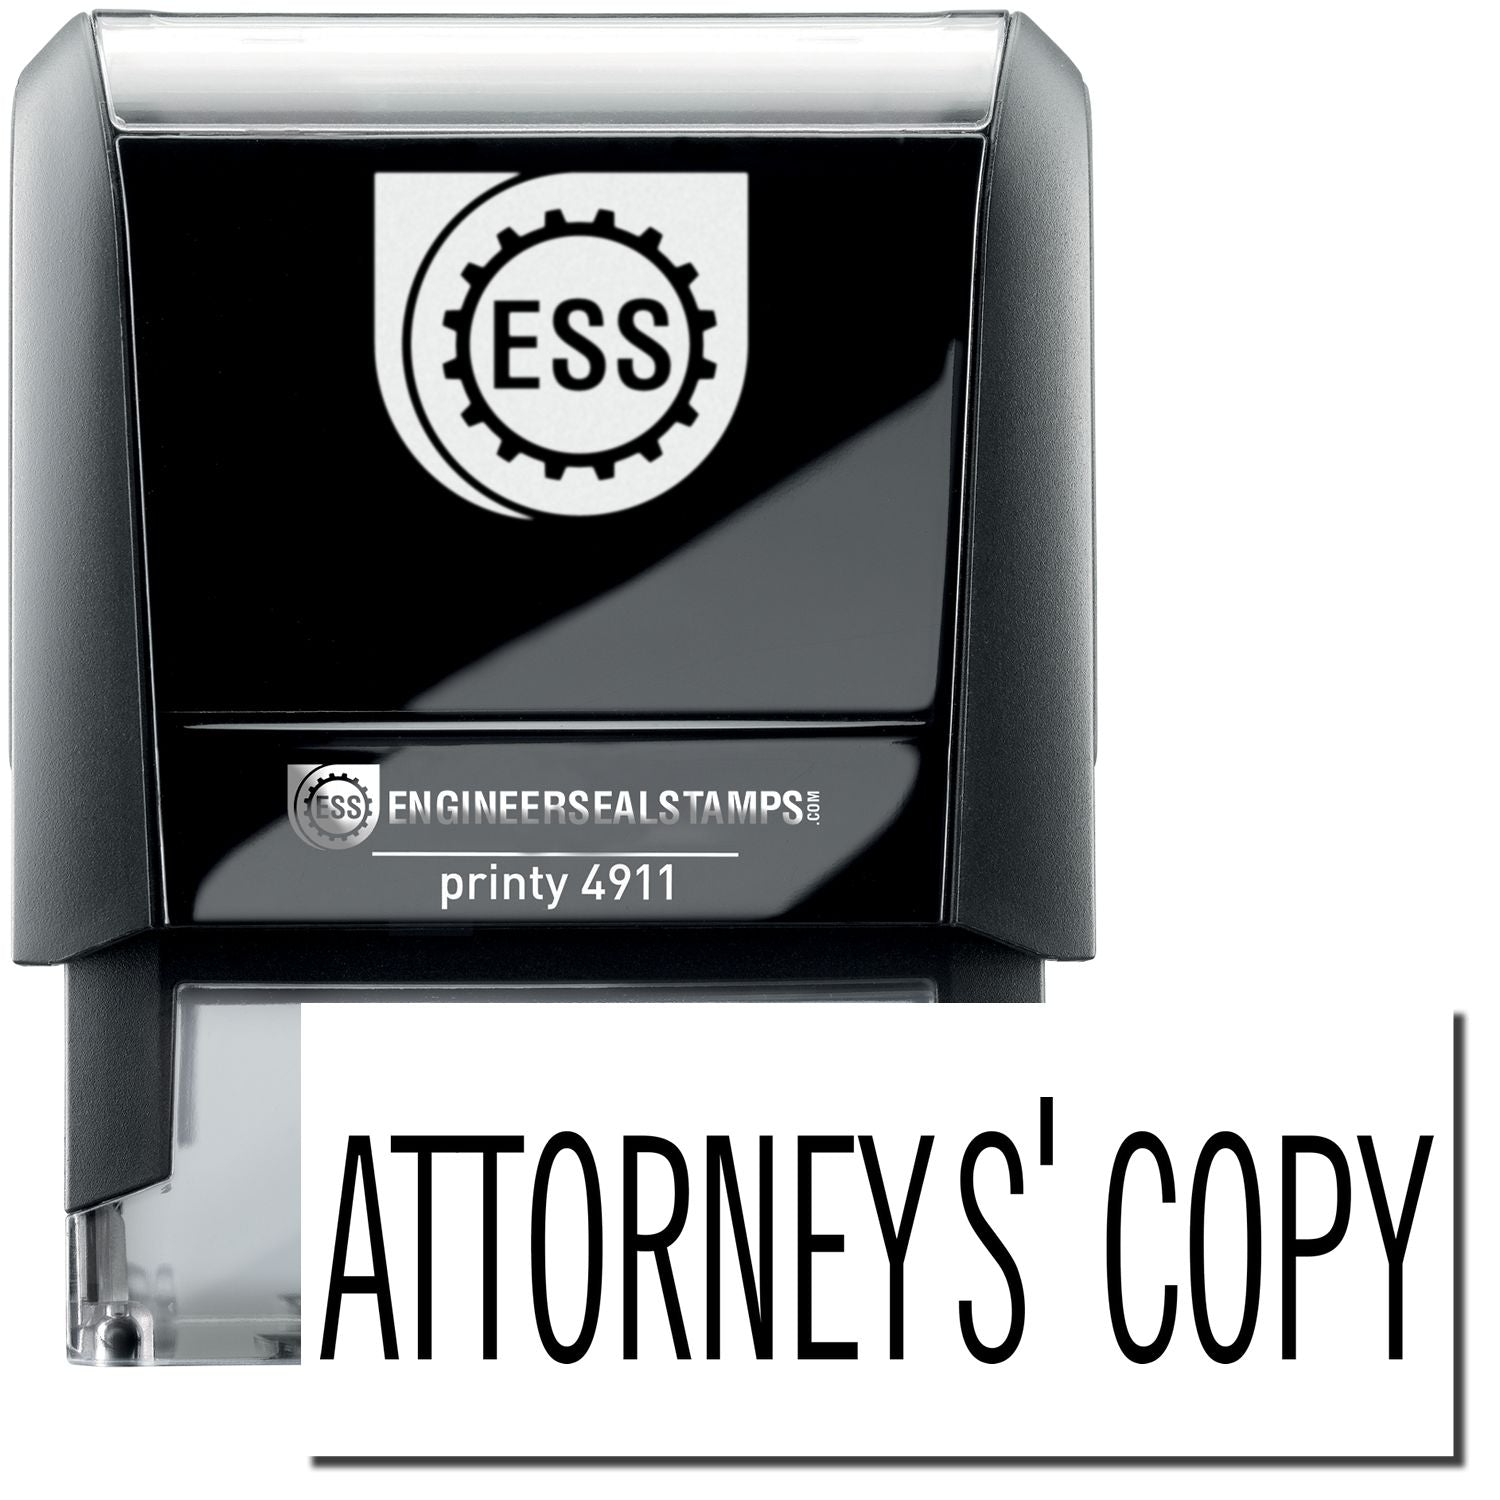 A self-inking stamp with a stamped image showing how the text "ATTORNEYS' COPY" is displayed after stamping.